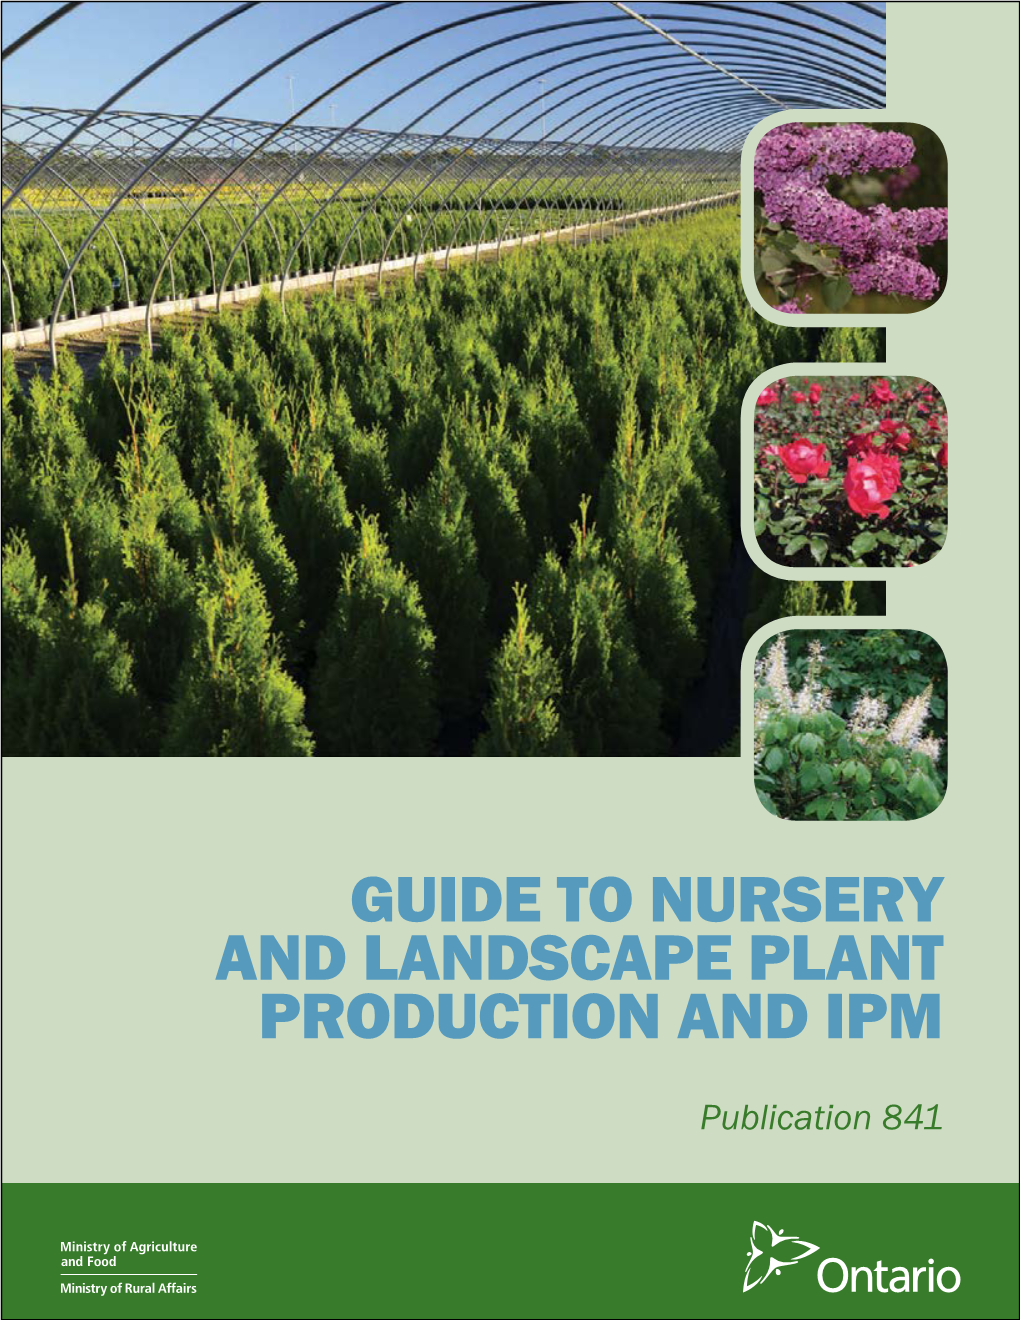 Publication 841, Guide to Nursery and Landscape Plant Production and IPM, Contains Comprehensive Information on Pest Management, Nutrition and Water Quality